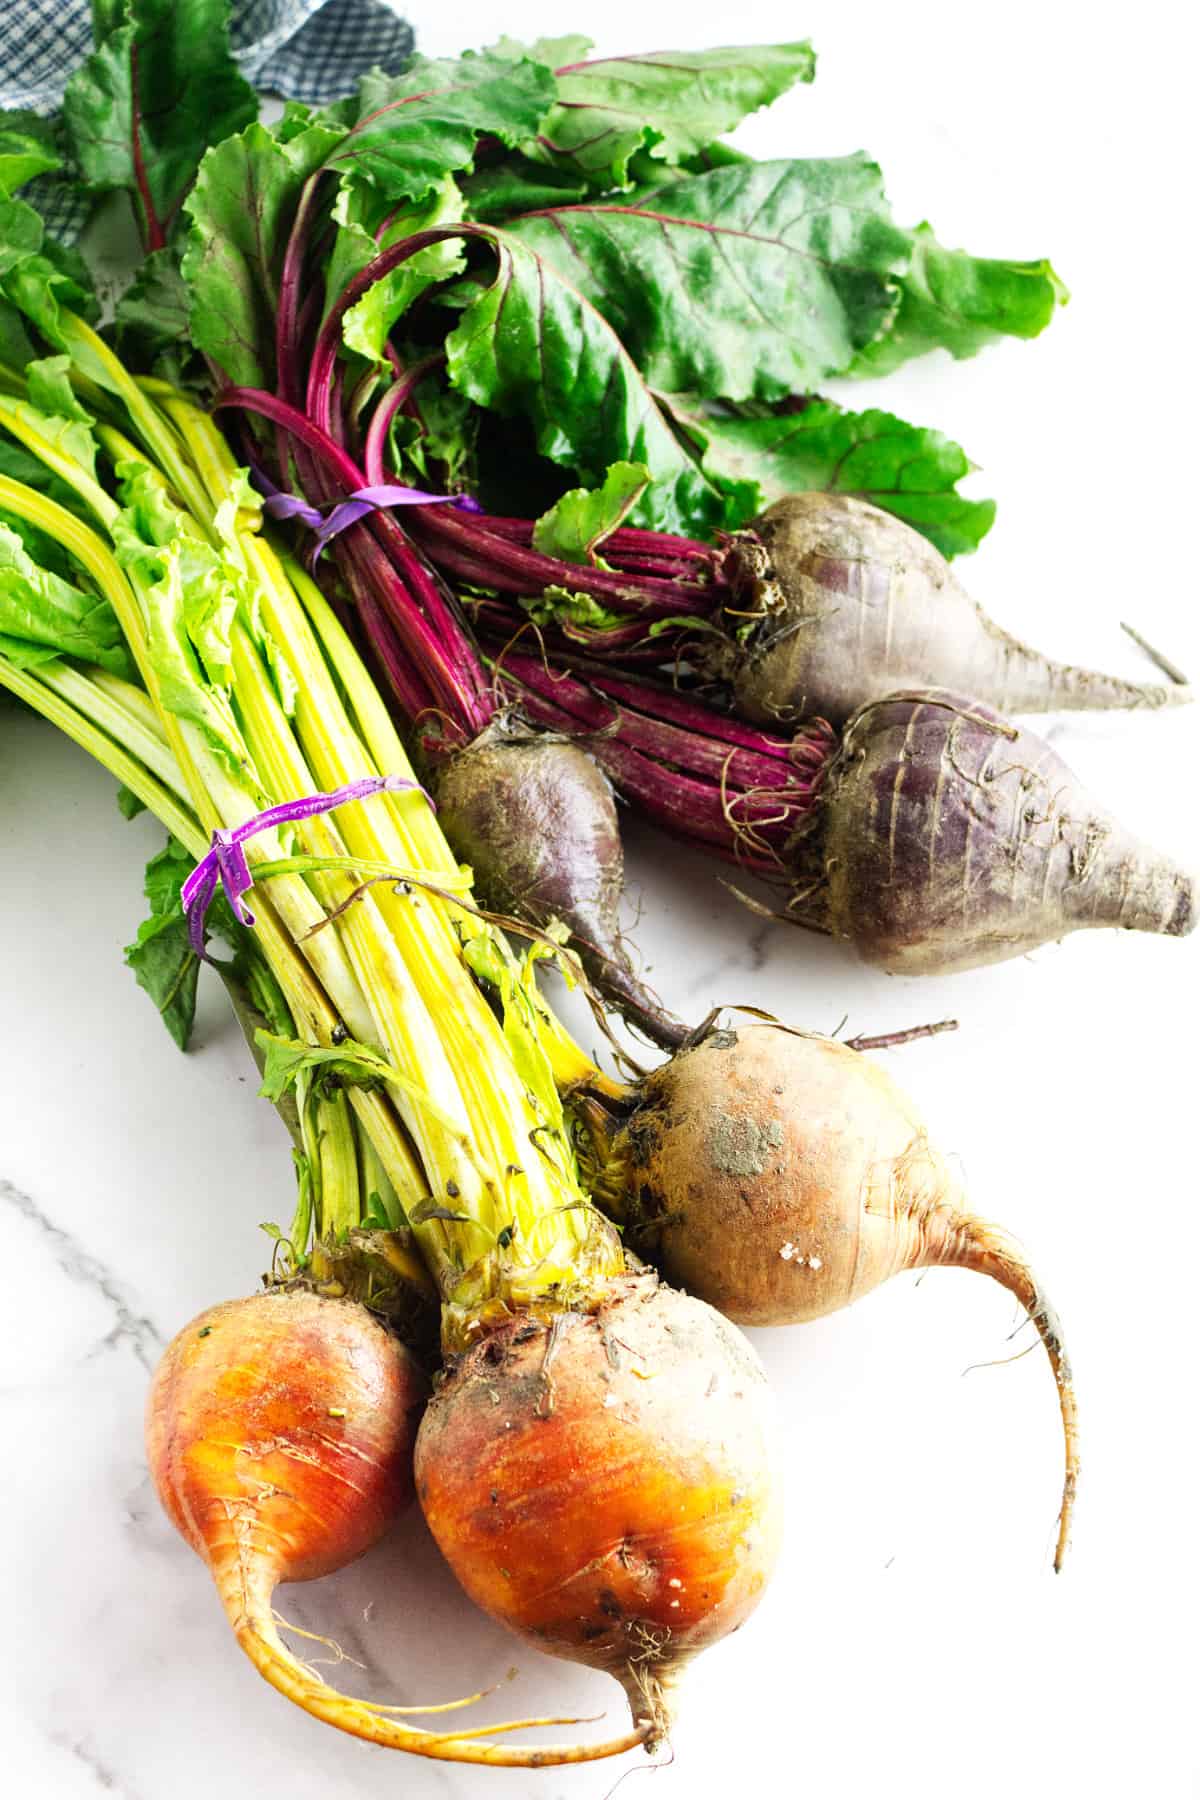 two bundles of fresh golden and red beets with stems and greens on them, on a white background.